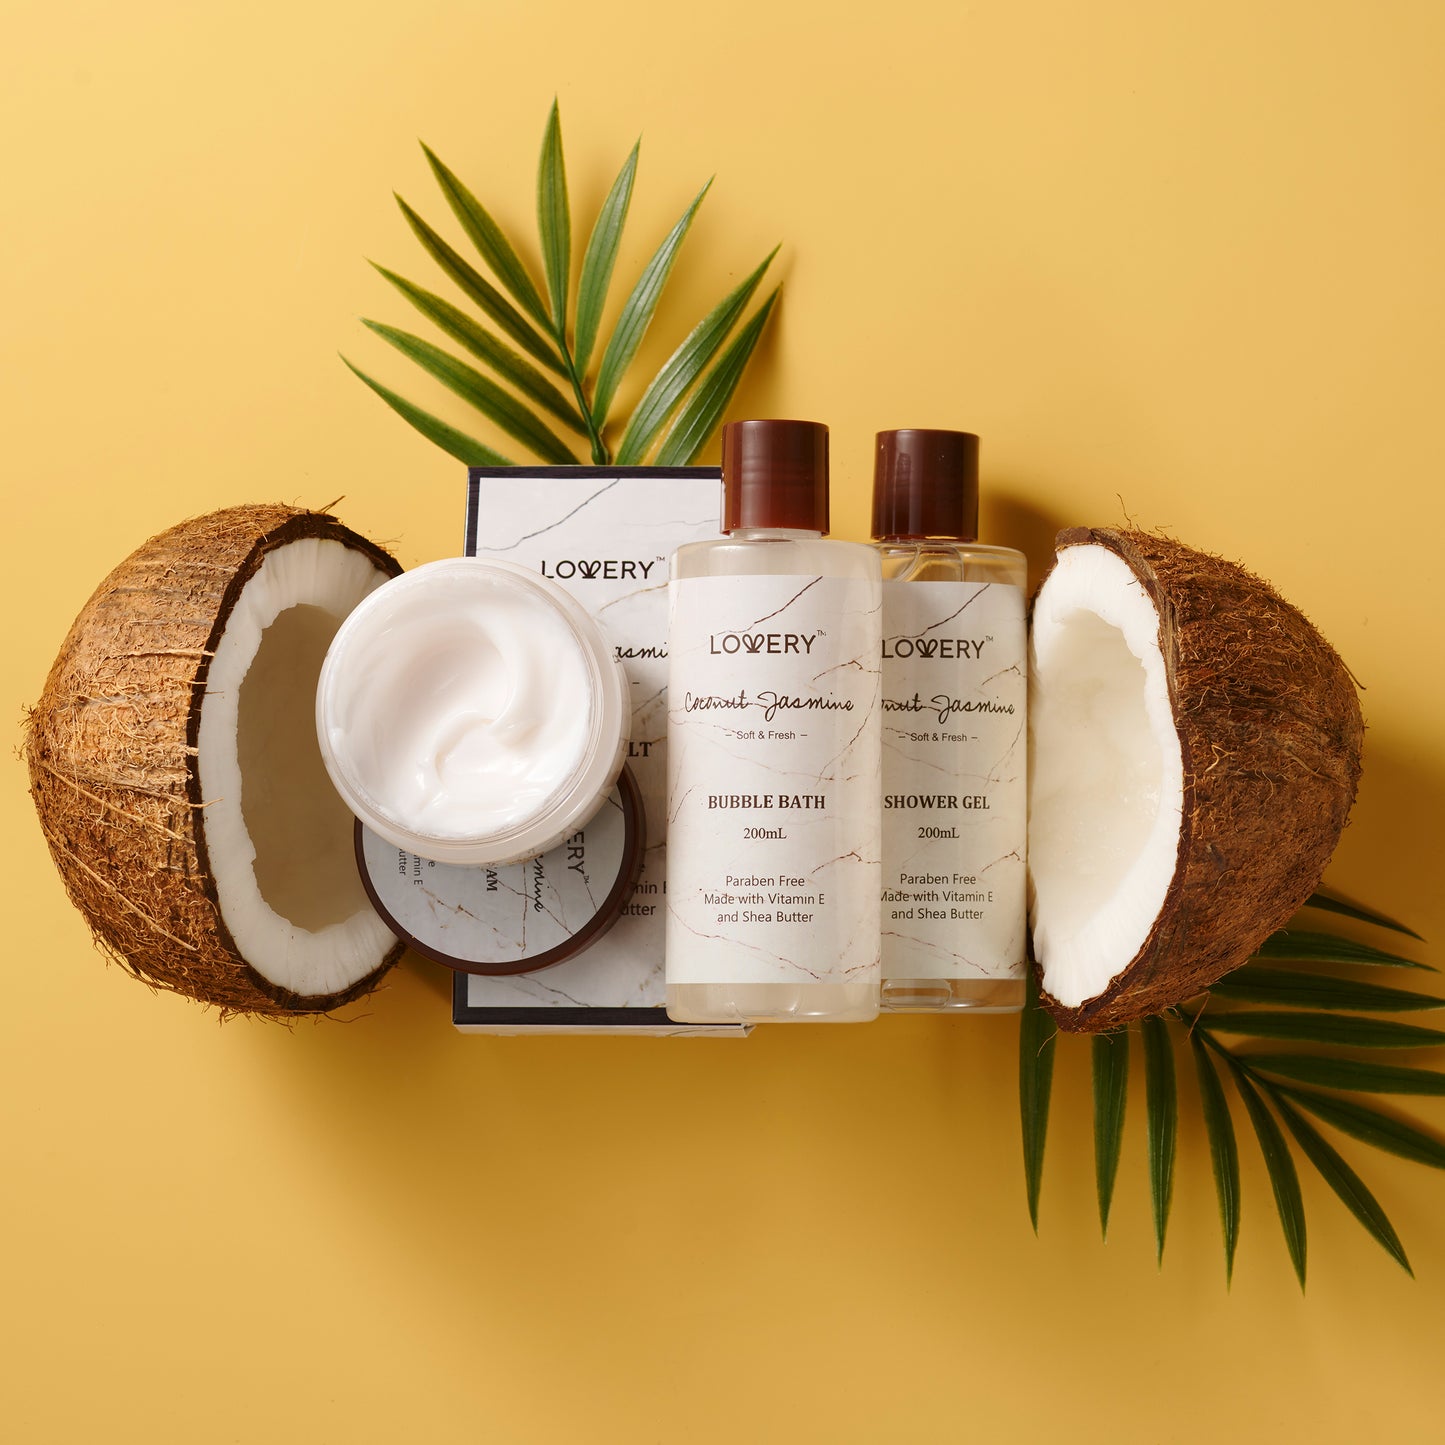 deluxe spa, lovery beauty products, lovery gift baskets, lovery, deluxe spa treatment, deluxe spa products, home deluxe spa, coconut jasmine gift basket, coconut jasmine spa, coconut body lotion, coconut gift basket, jasmine gift basket, coconut lovery basket, jasmine lovery basket